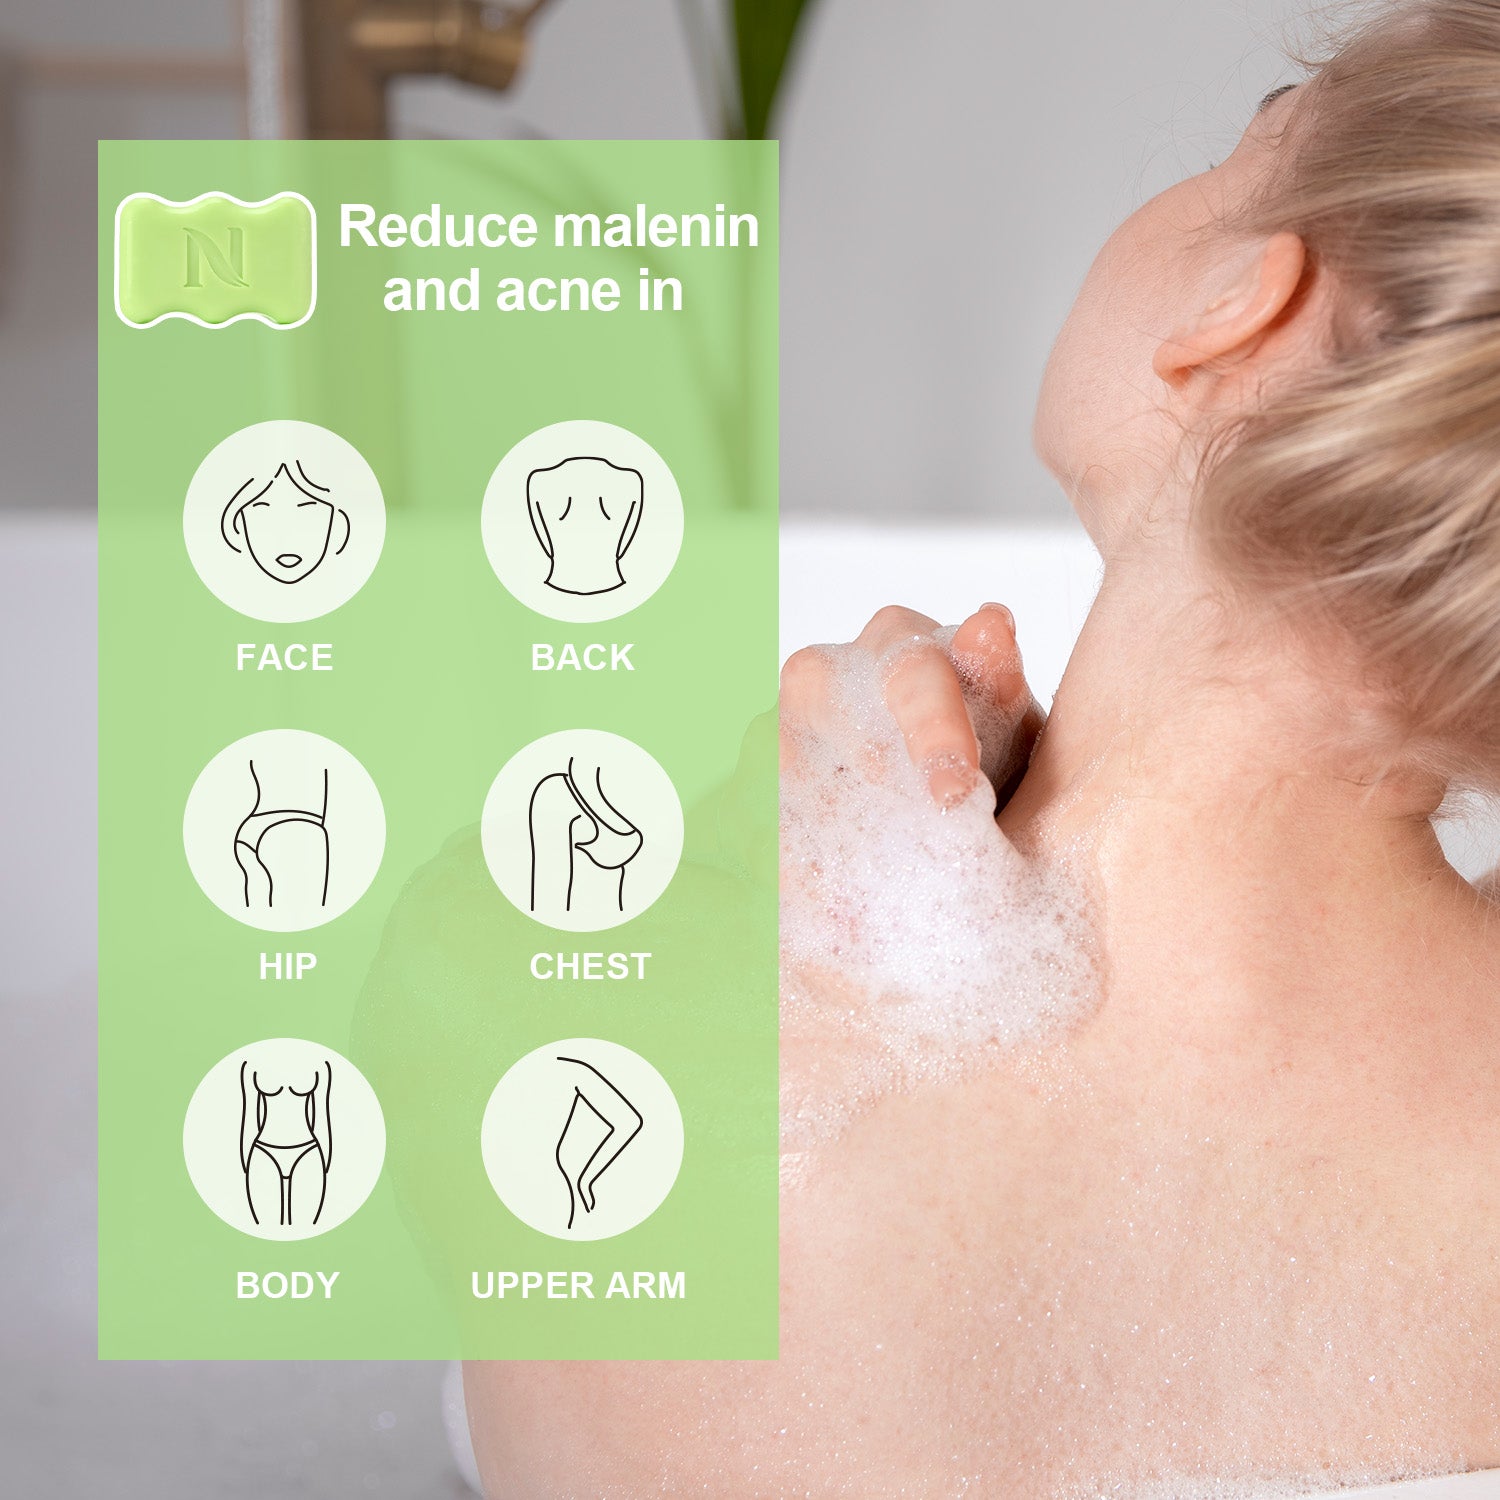 where to use the ojic acid +tea tree soap: face, back, body, arm and etc